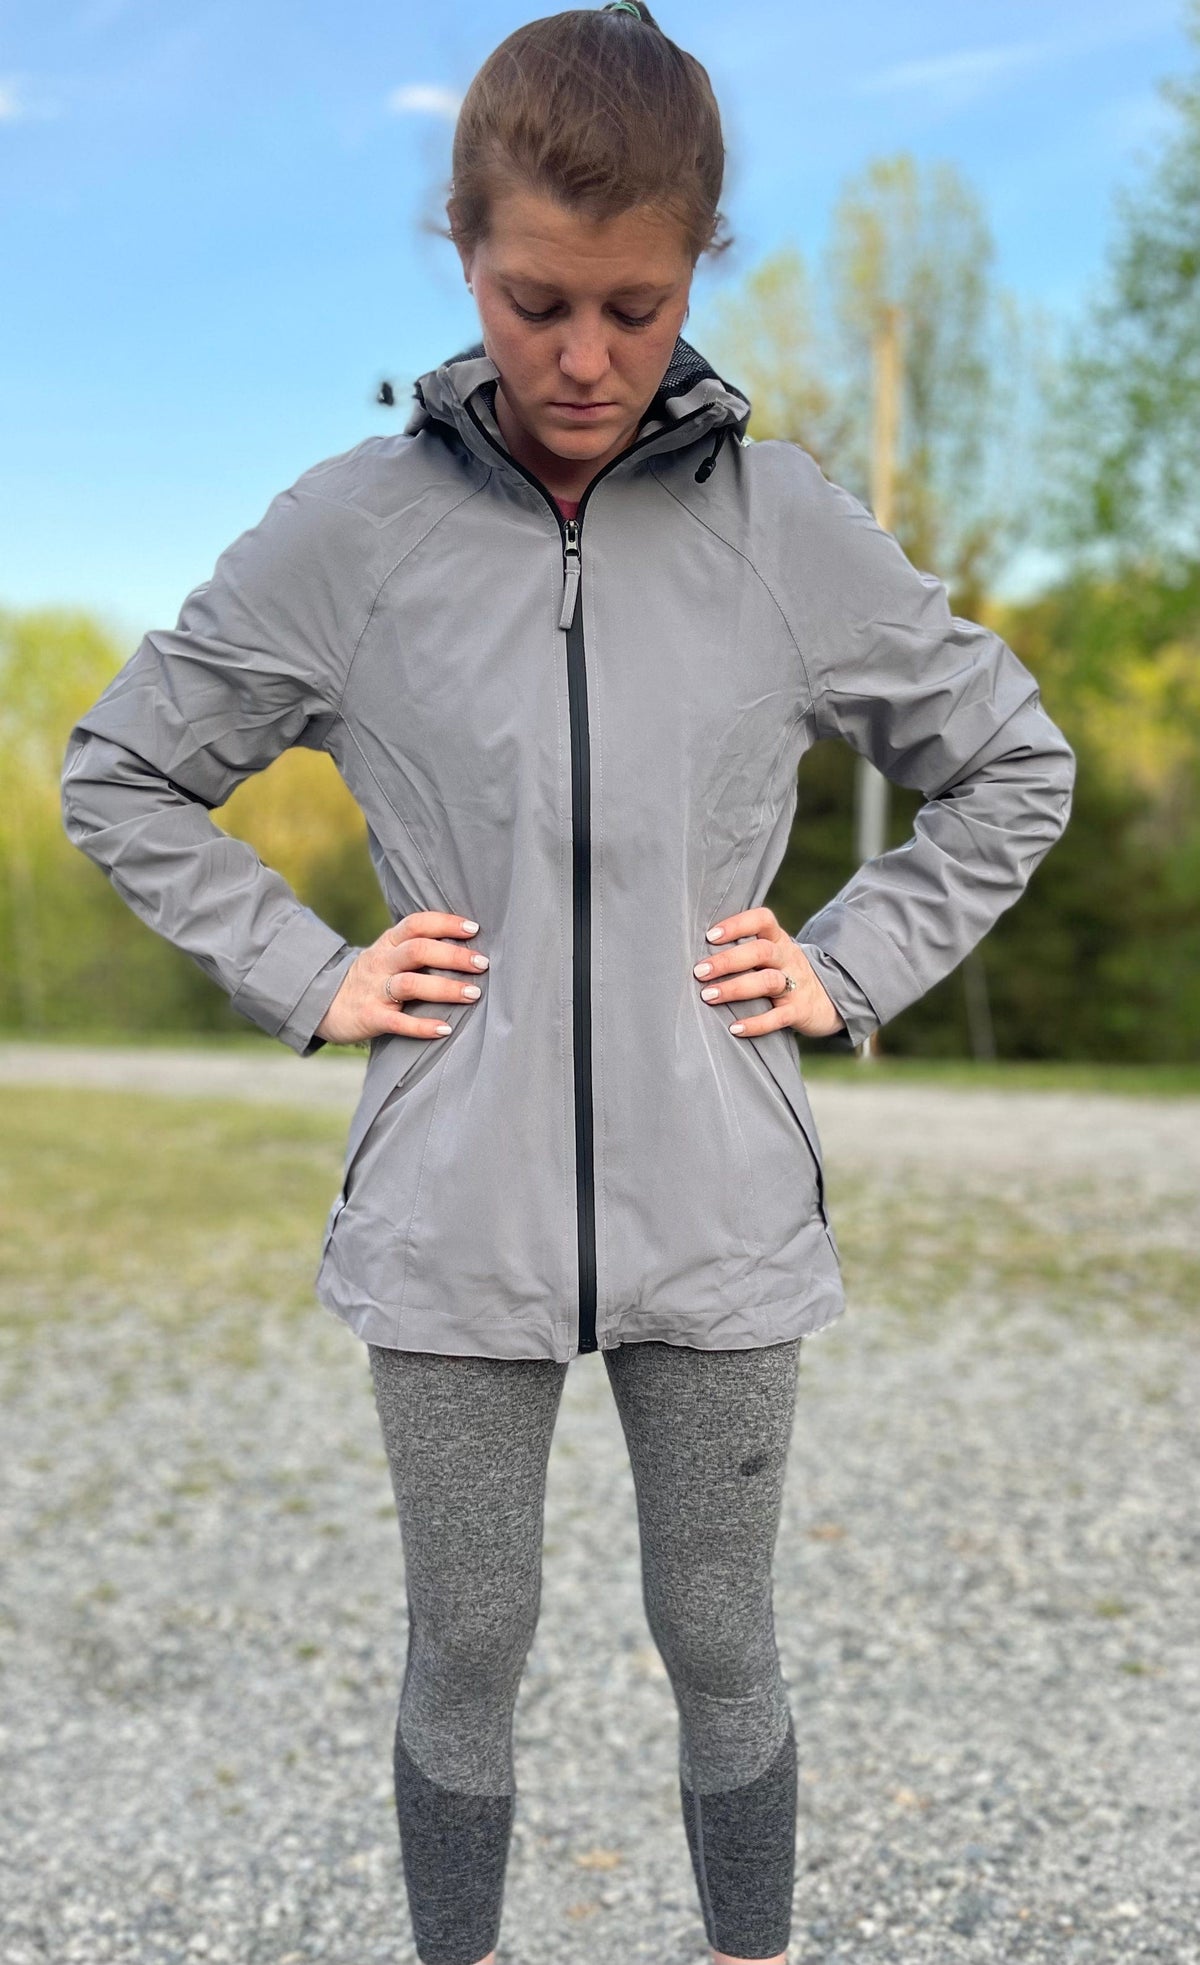 Chestnut Bay rain coat Chestnut Bay- Rainy Day Waterproof Pants equestrian team apparel online tack store mobile tack store custom farm apparel custom show stable clothing equestrian lifestyle horse show clothing riding clothes horses equestrian tack store